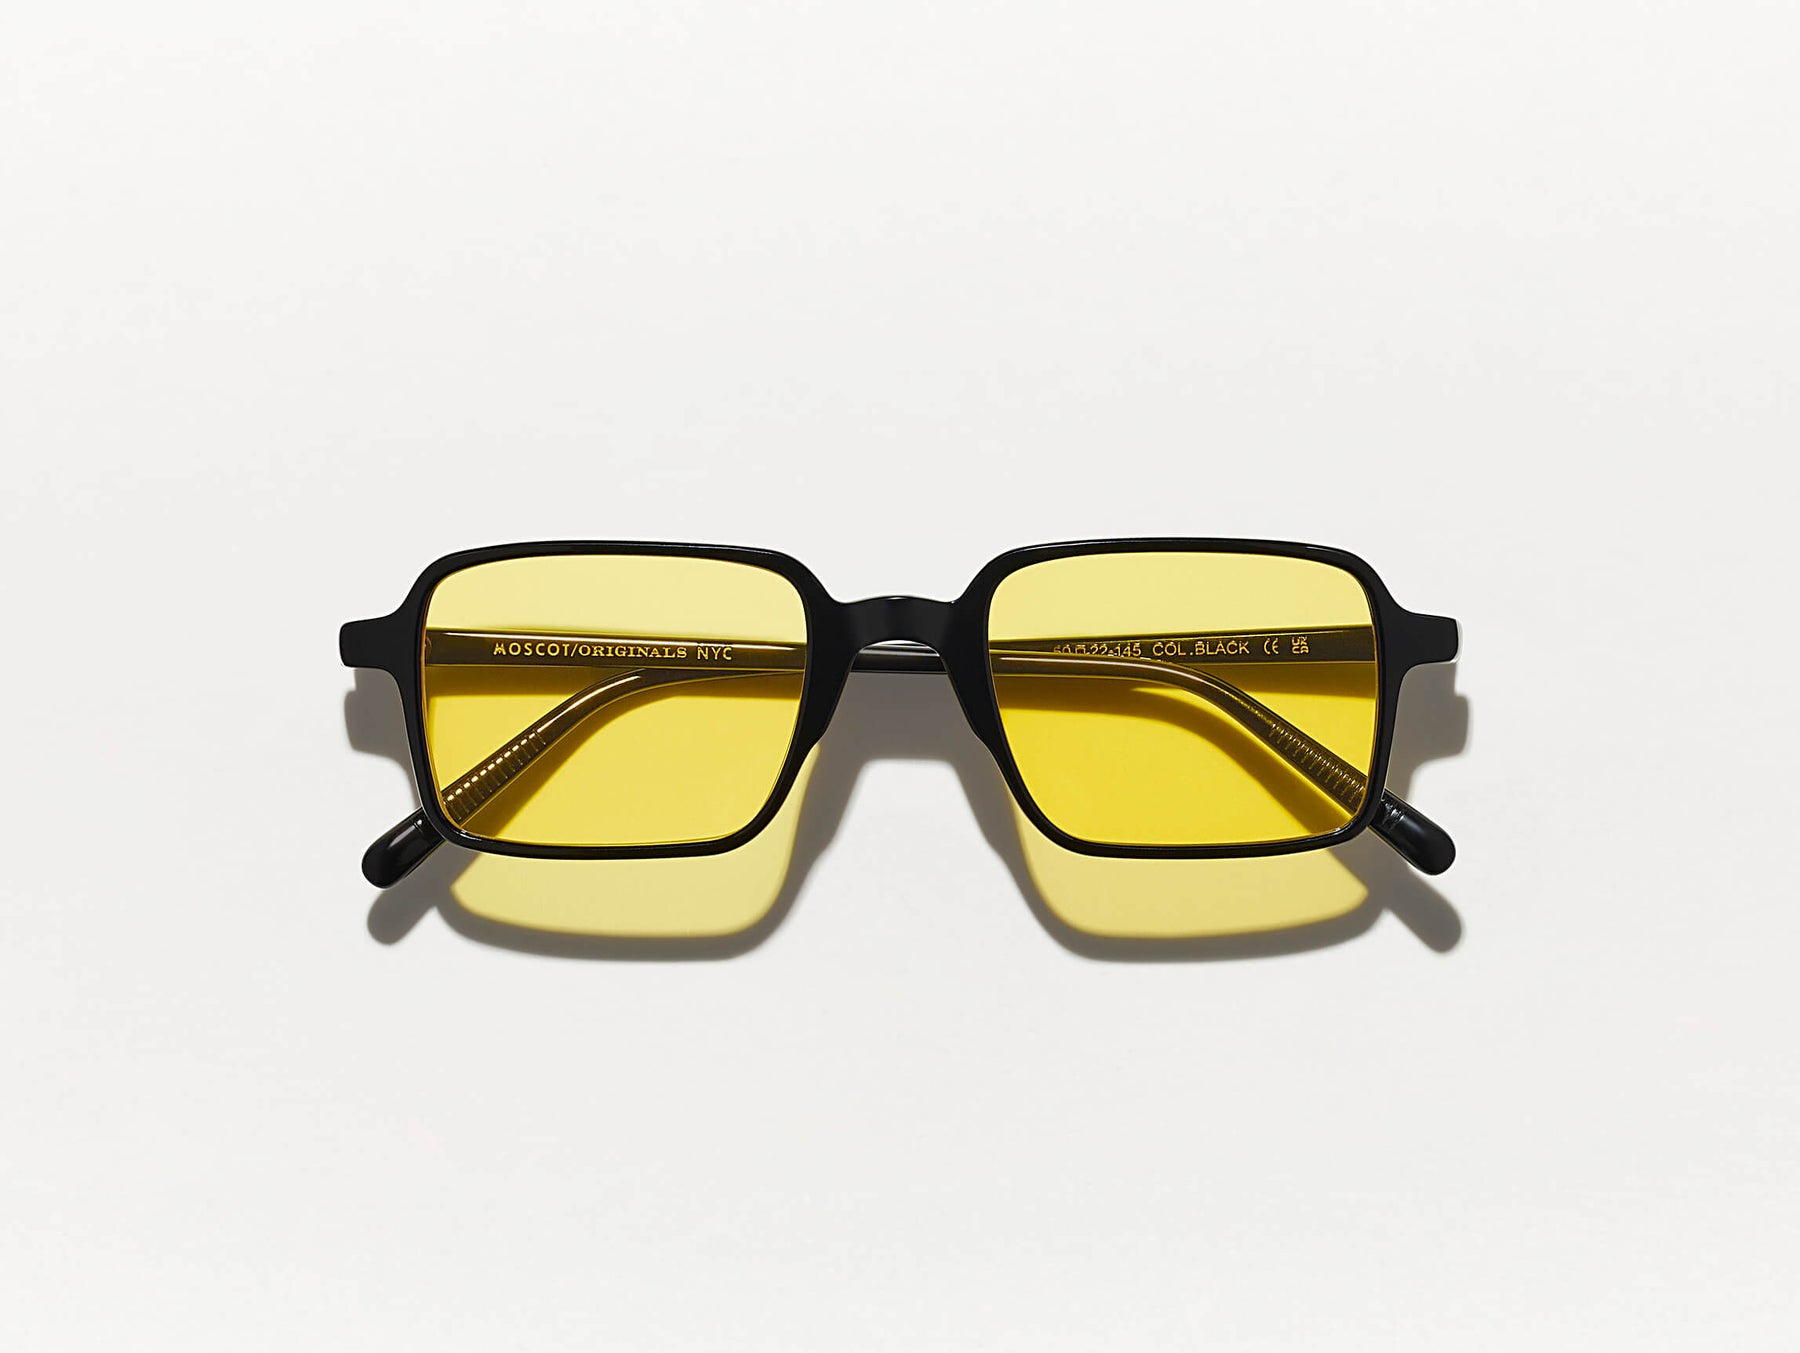 The SHINDIG Black with Mellow Yellow Tinted Lenses